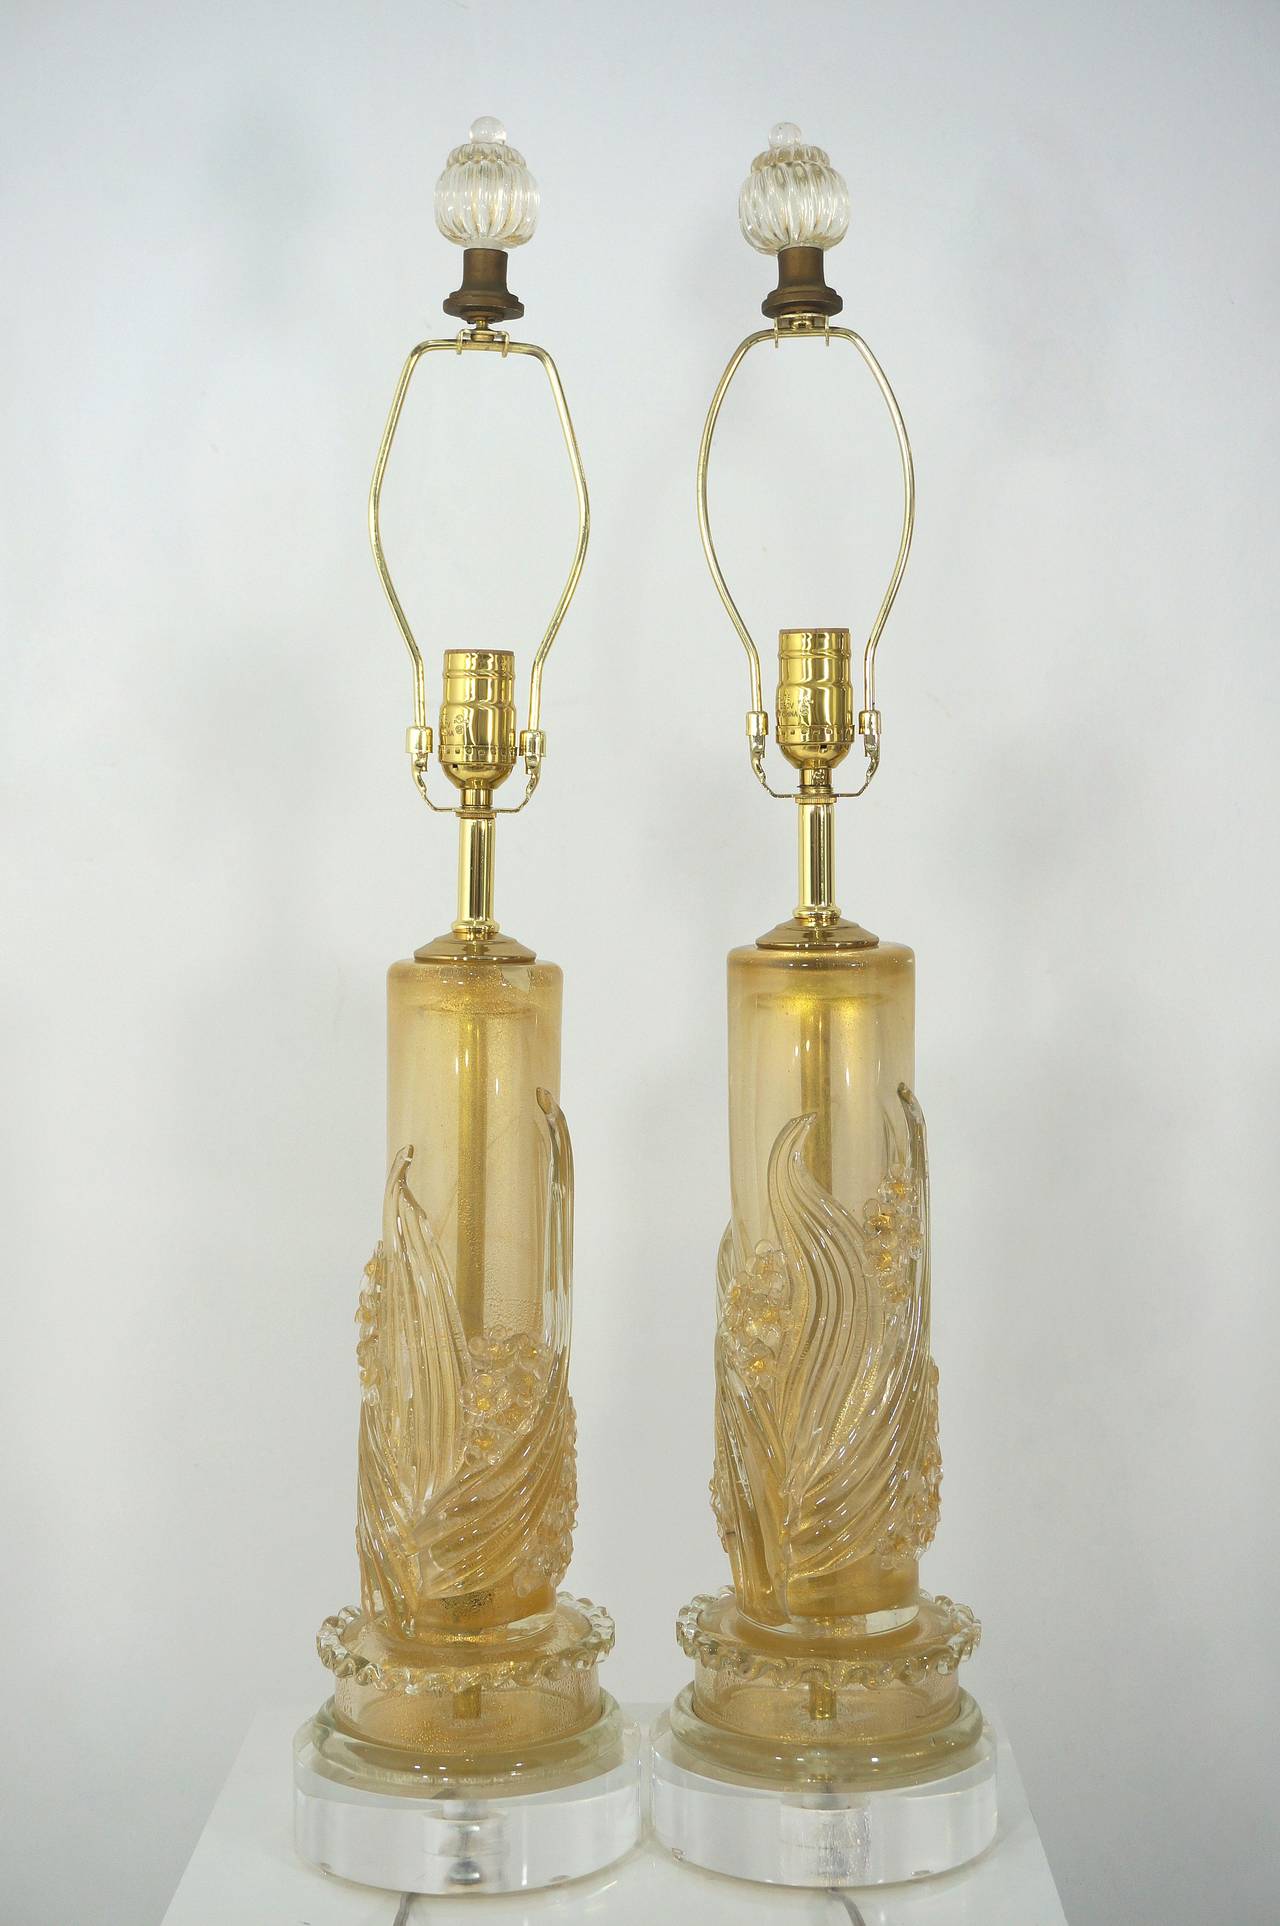 20th Century Pair of Murano Table Lamps:  Attributed to Ercole Barovier 1940s